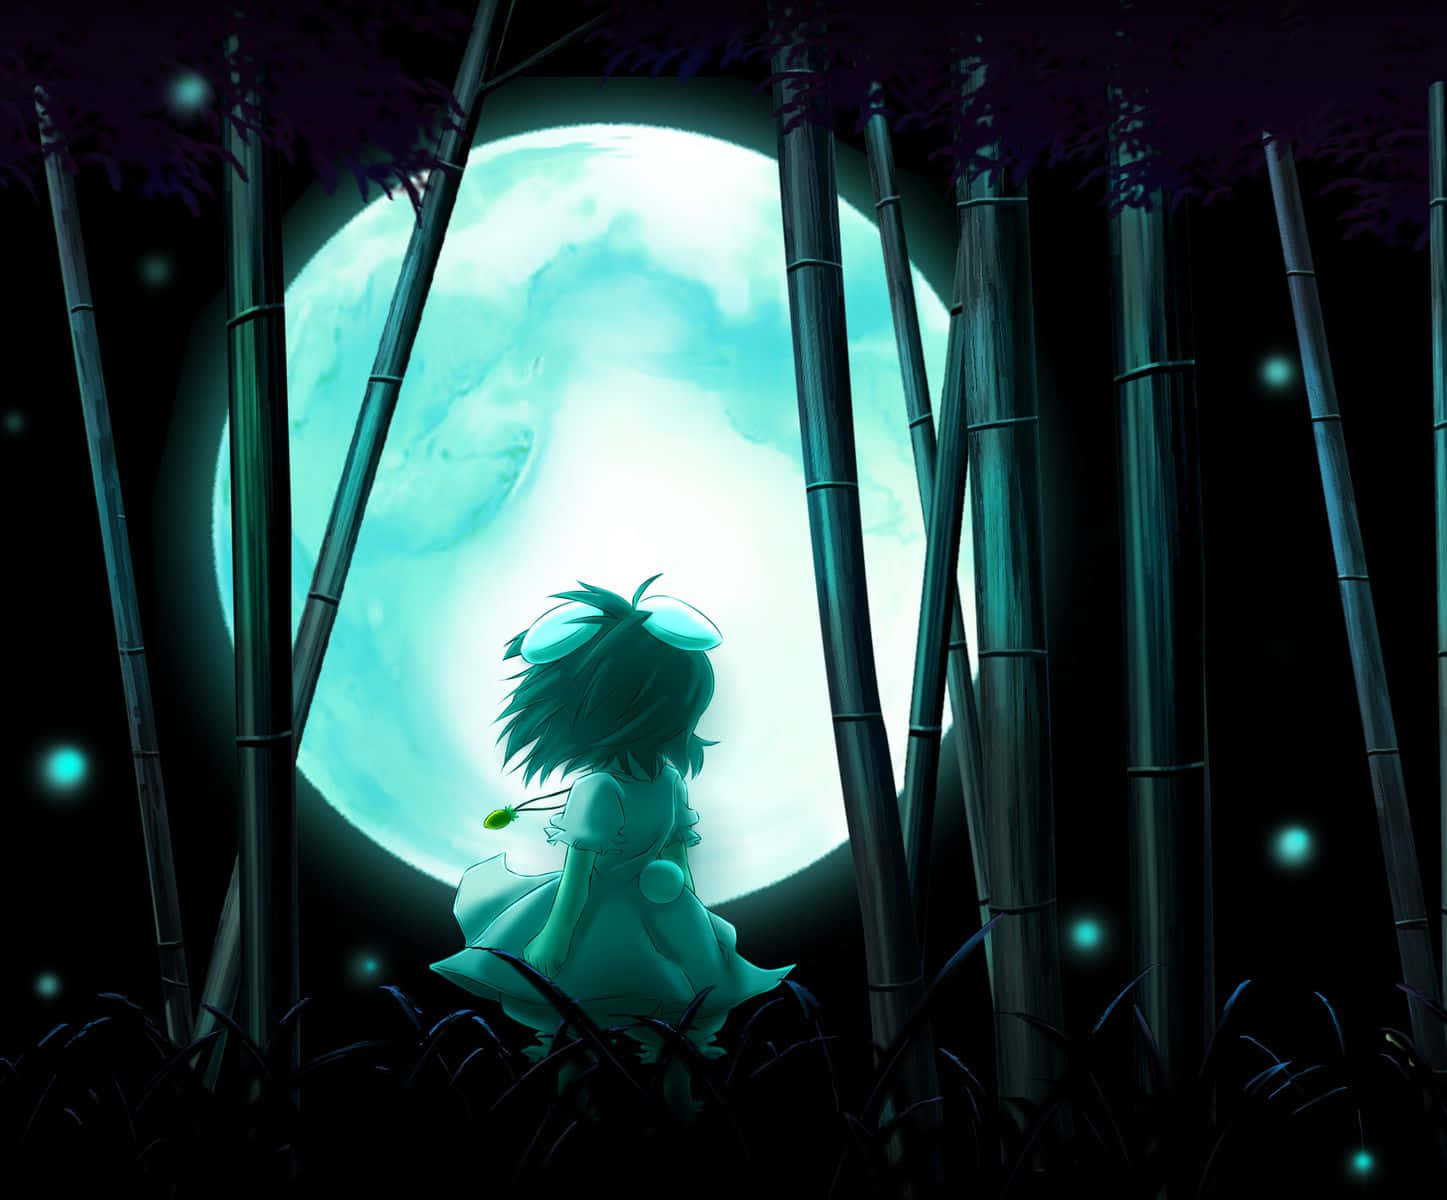 Get lost in the mystical Anime Forest